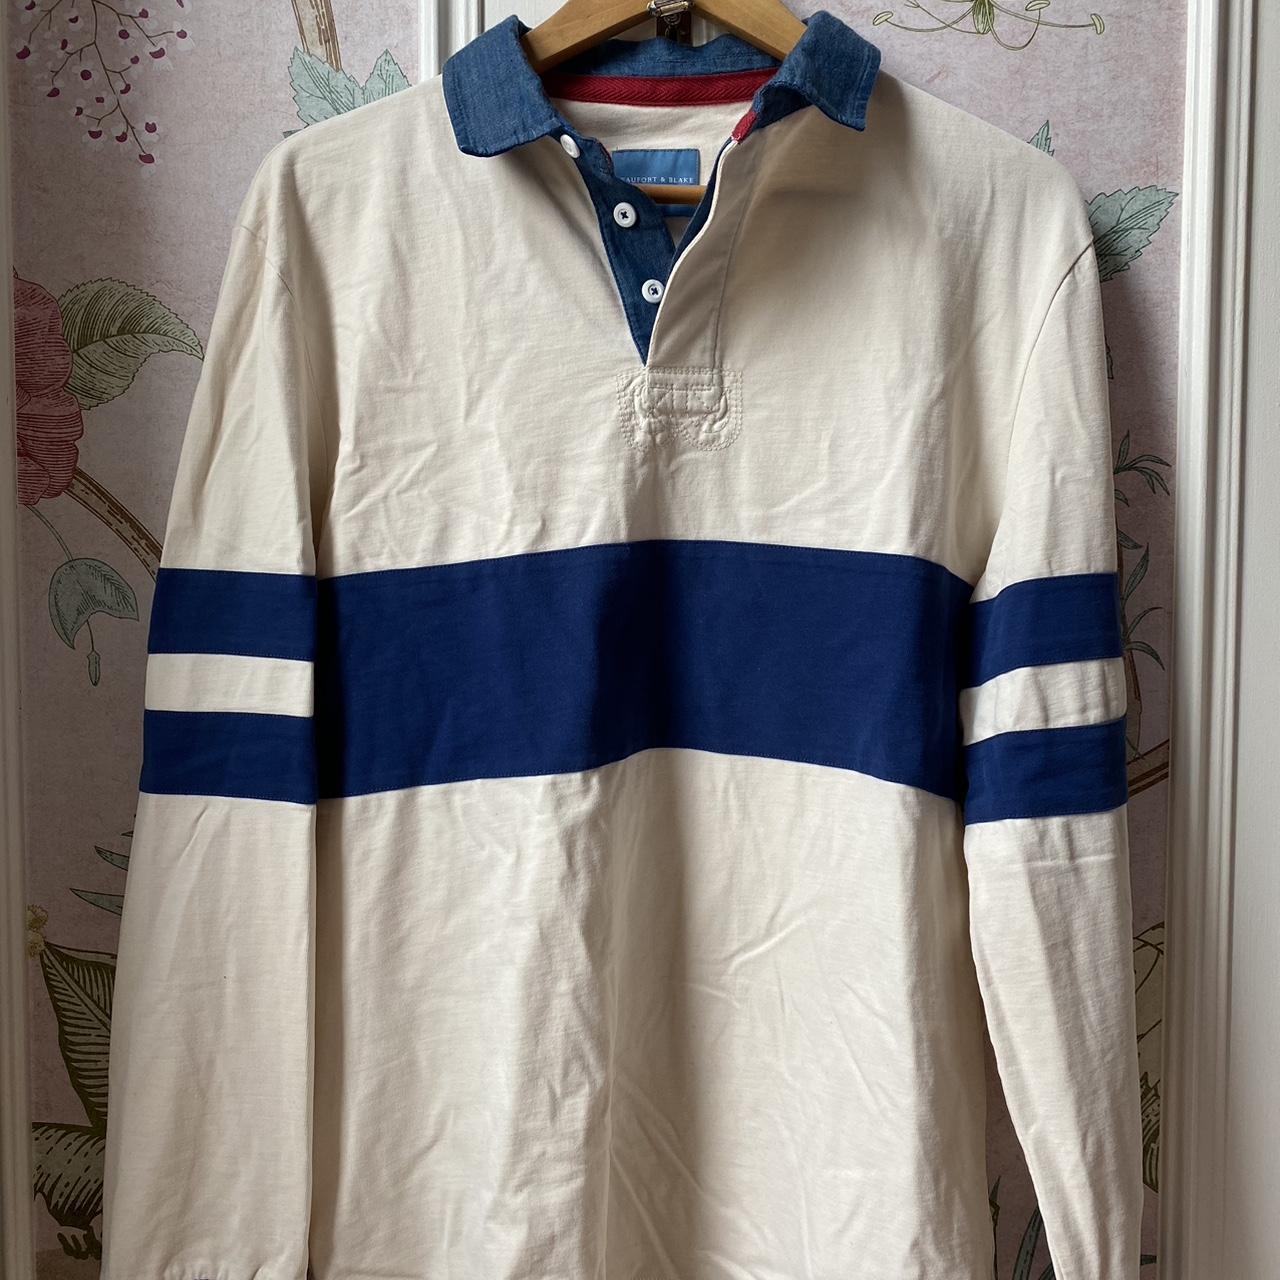 Beaufort and Blake Men’s Rugby Shirt Top Size... - Depop